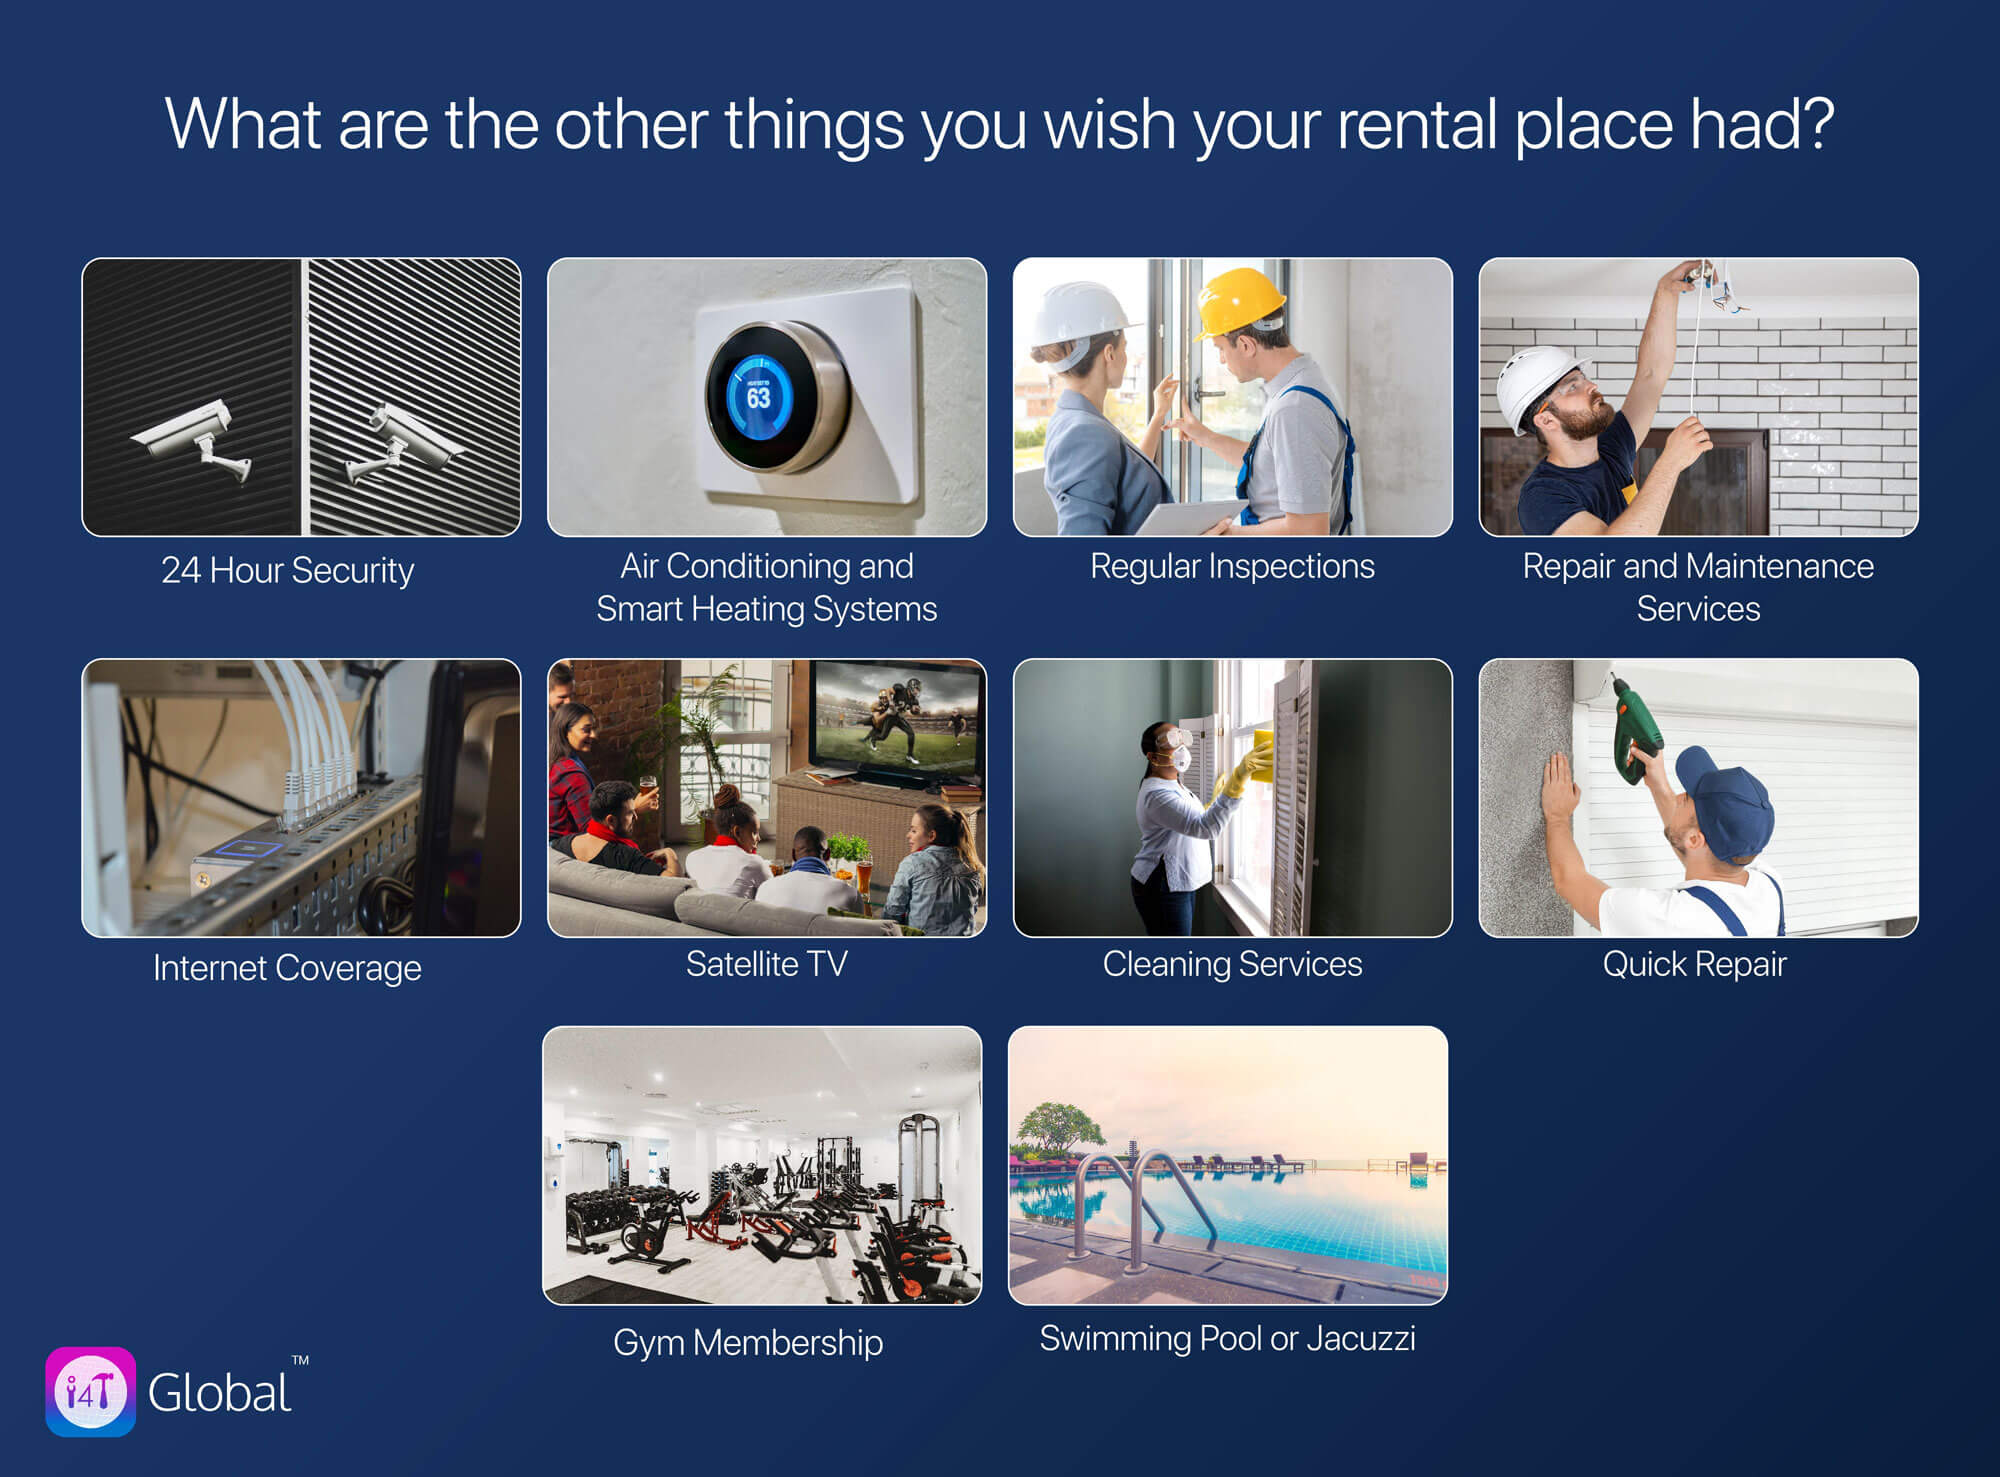 Things you wish that your rental place has - i4T Global